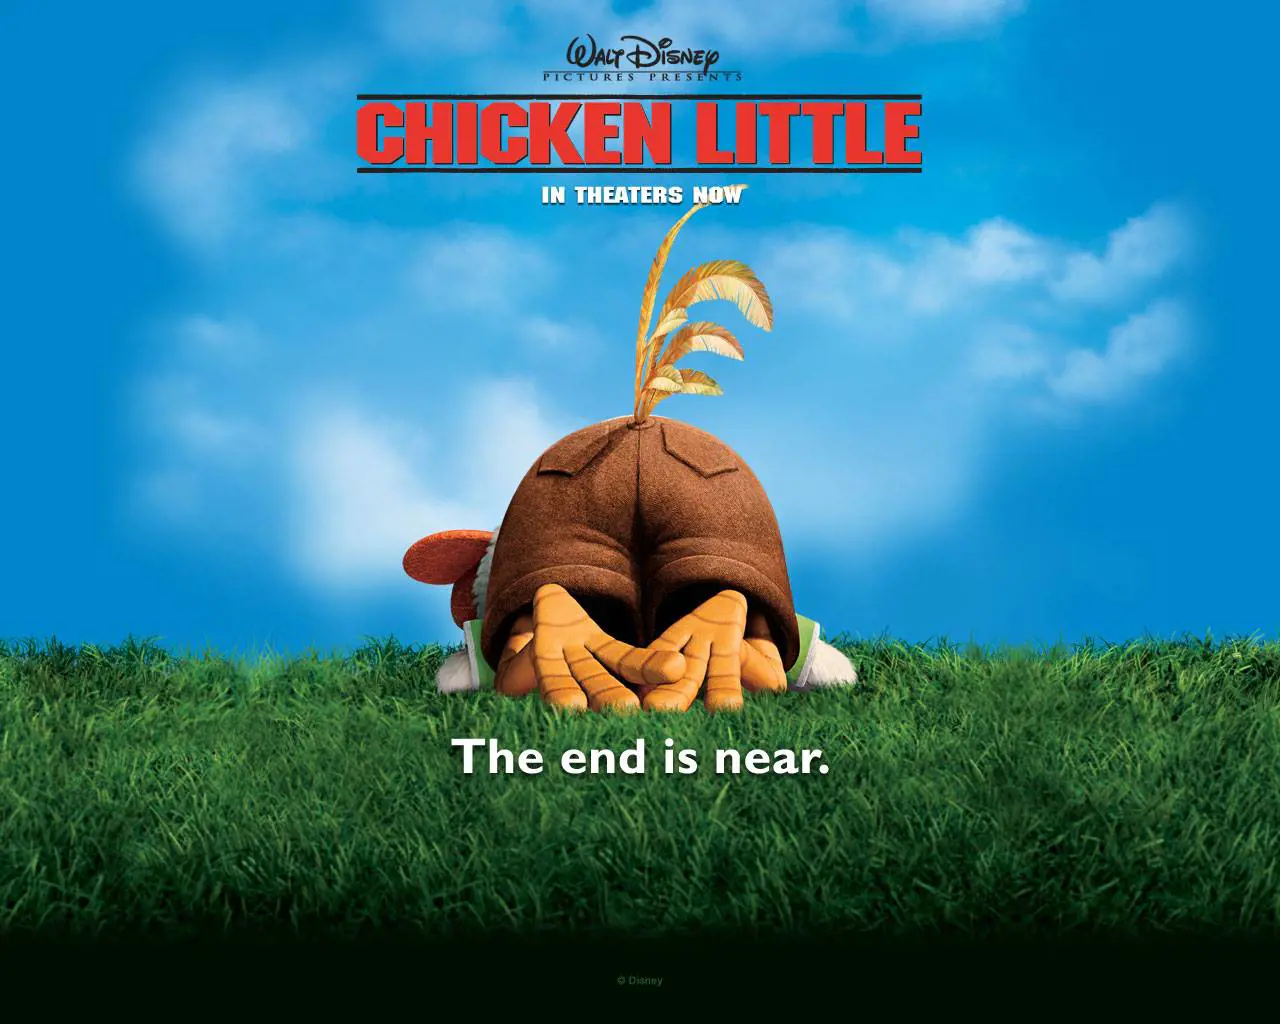 Mark Dindal directed and wrote Chicken Little which was released in November 2005